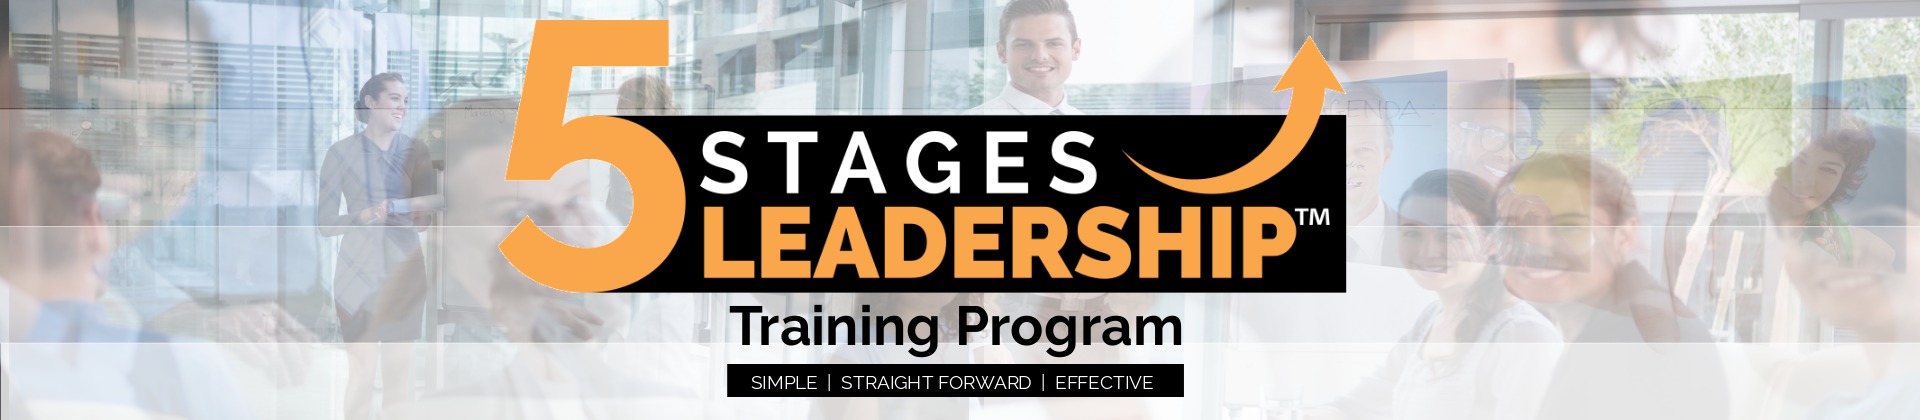 Get Qualified for the 5 Stages Leadership Training Program